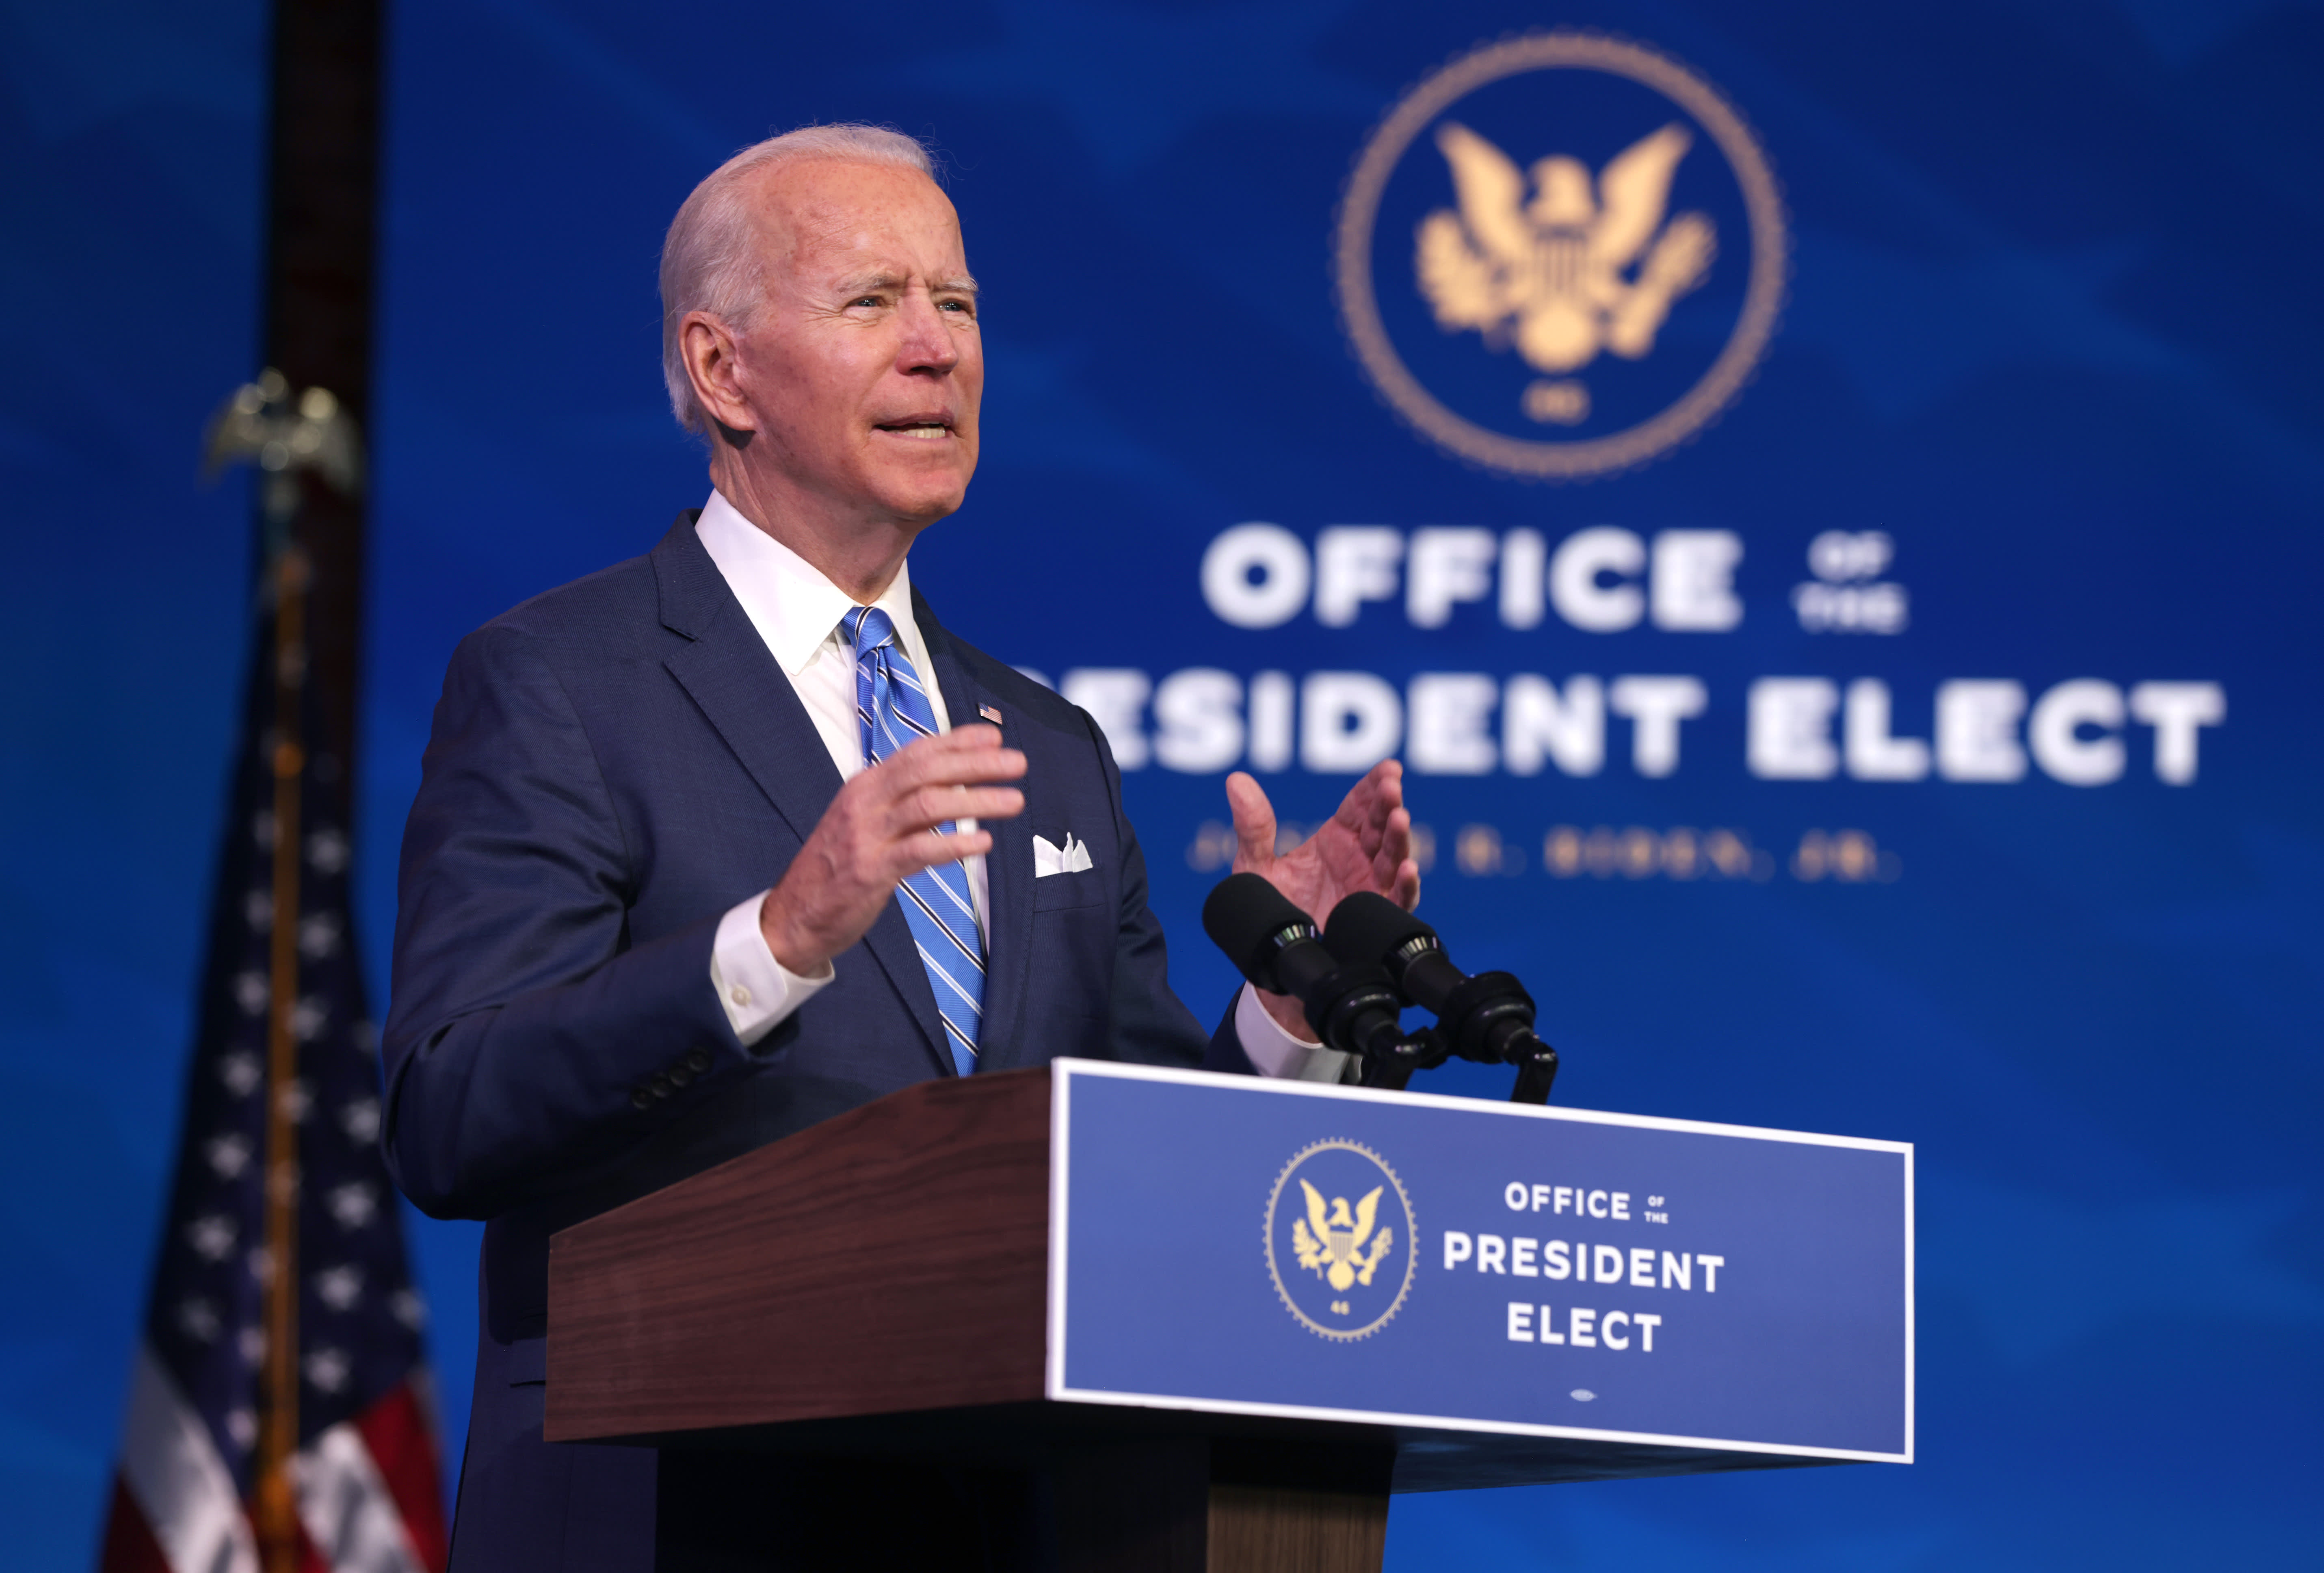 Biden’s stimulus plan could attract funds from Asia, China to the US: JPMorgan